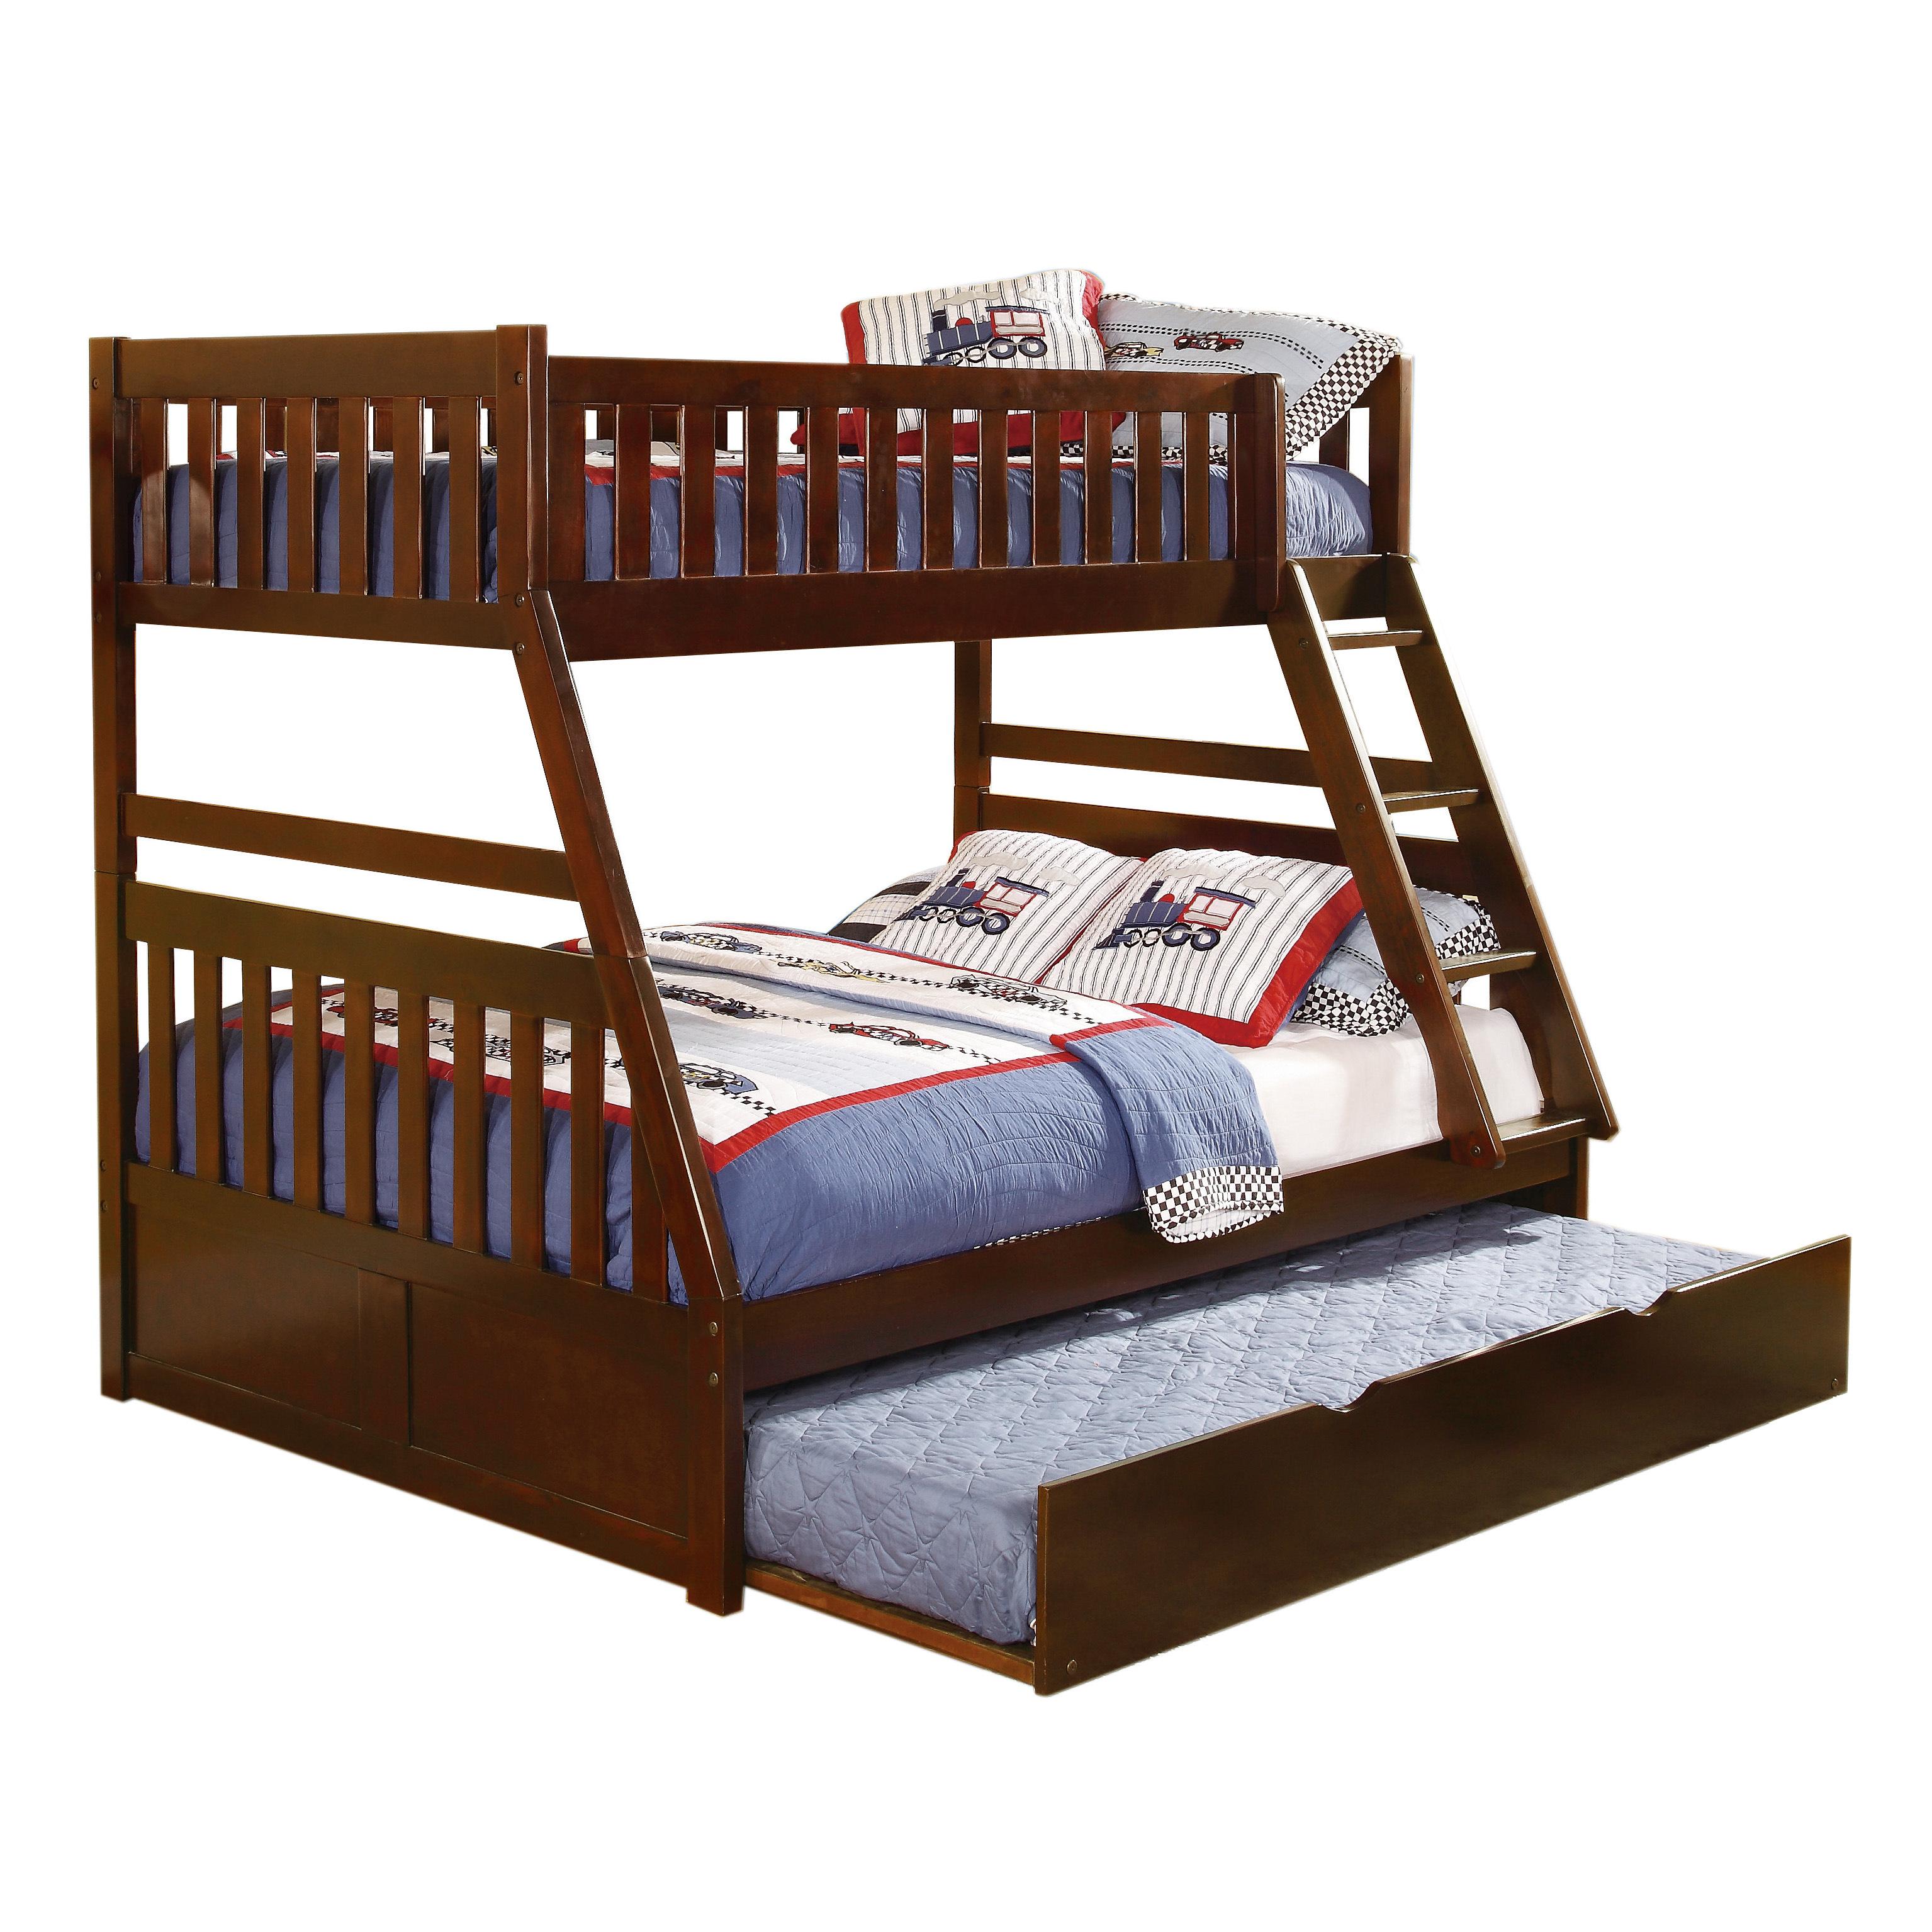 

    
Transitional Dark Cherry Wood Twin/Full Bunk Bed w/Trundle Homelegance B2013TFDC-1*R Rowe
